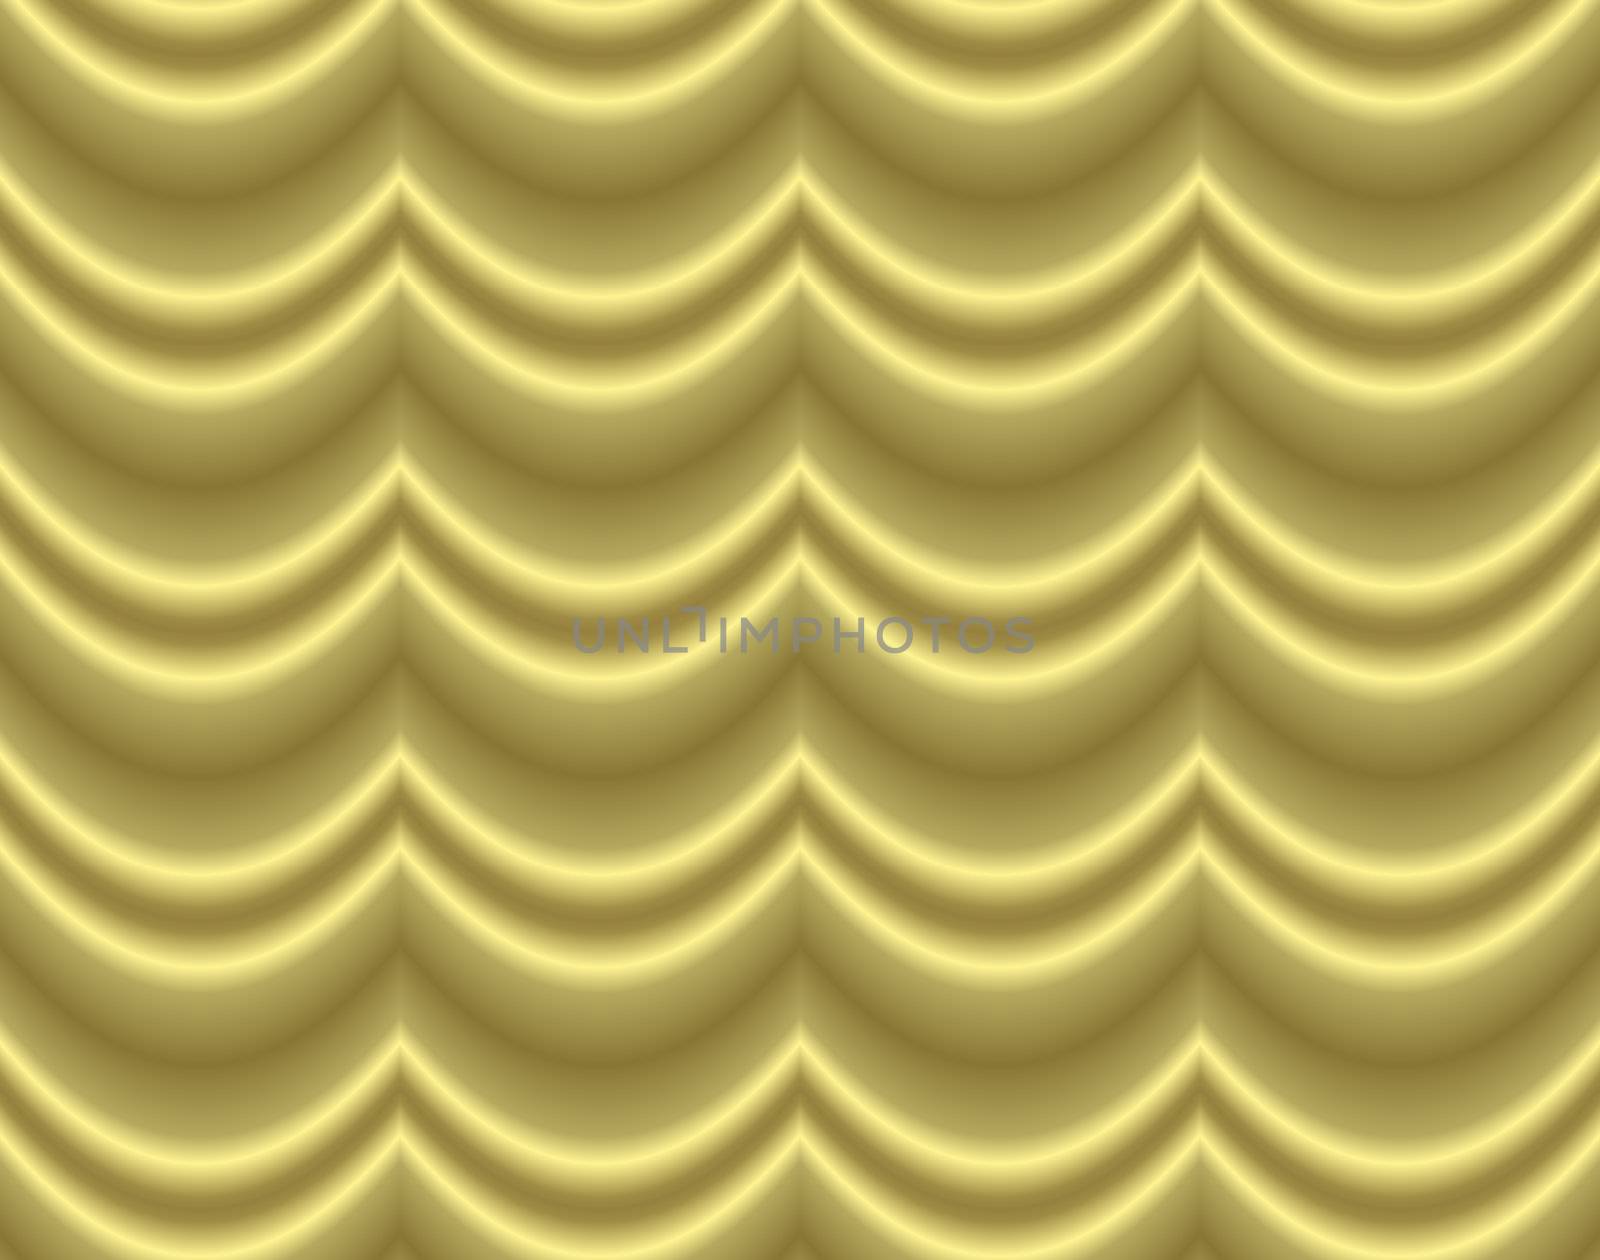 golden background tile with waves, wavy pattern